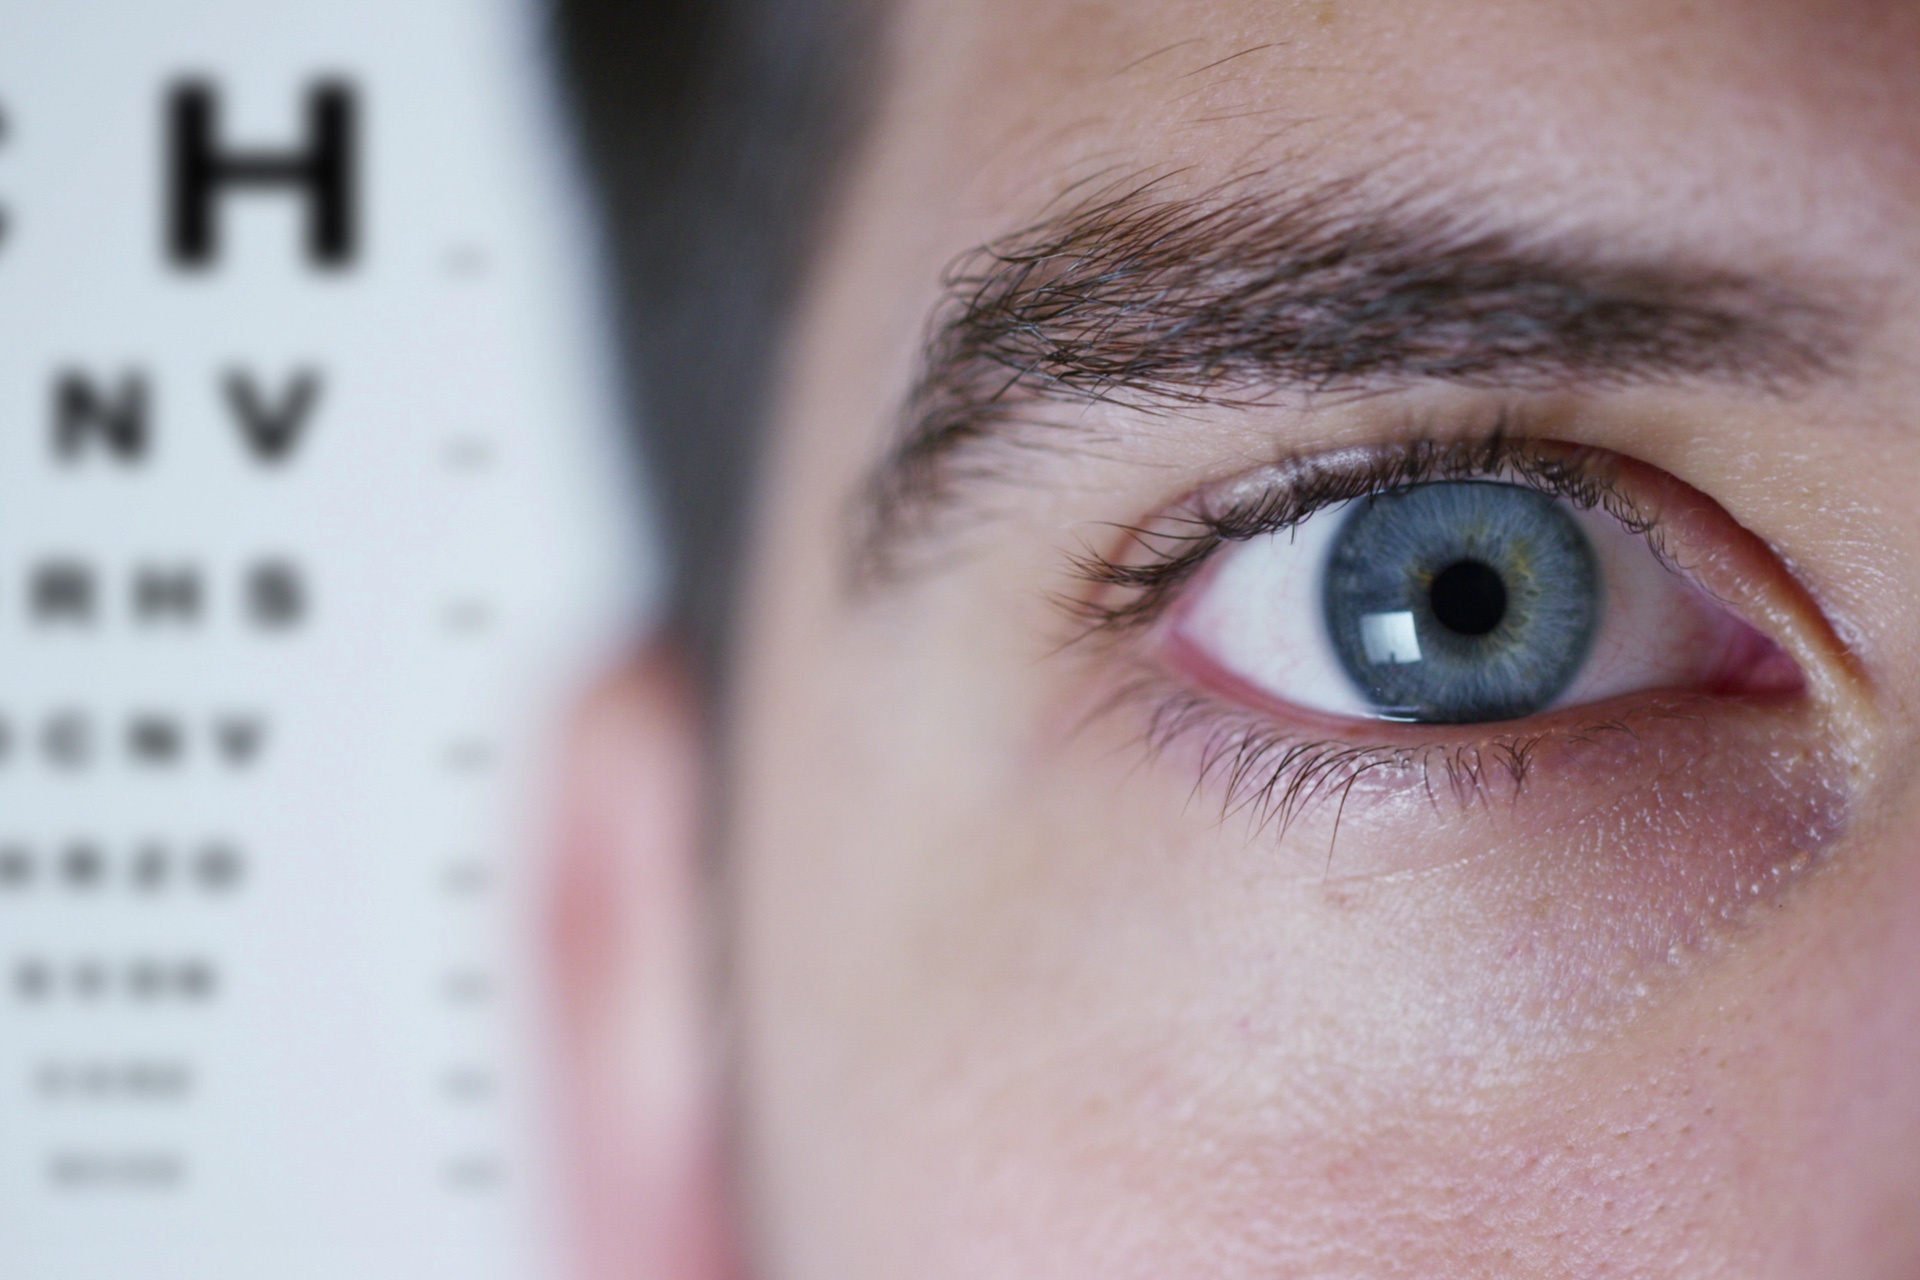 close up image of a person's eye with eye chart behind them